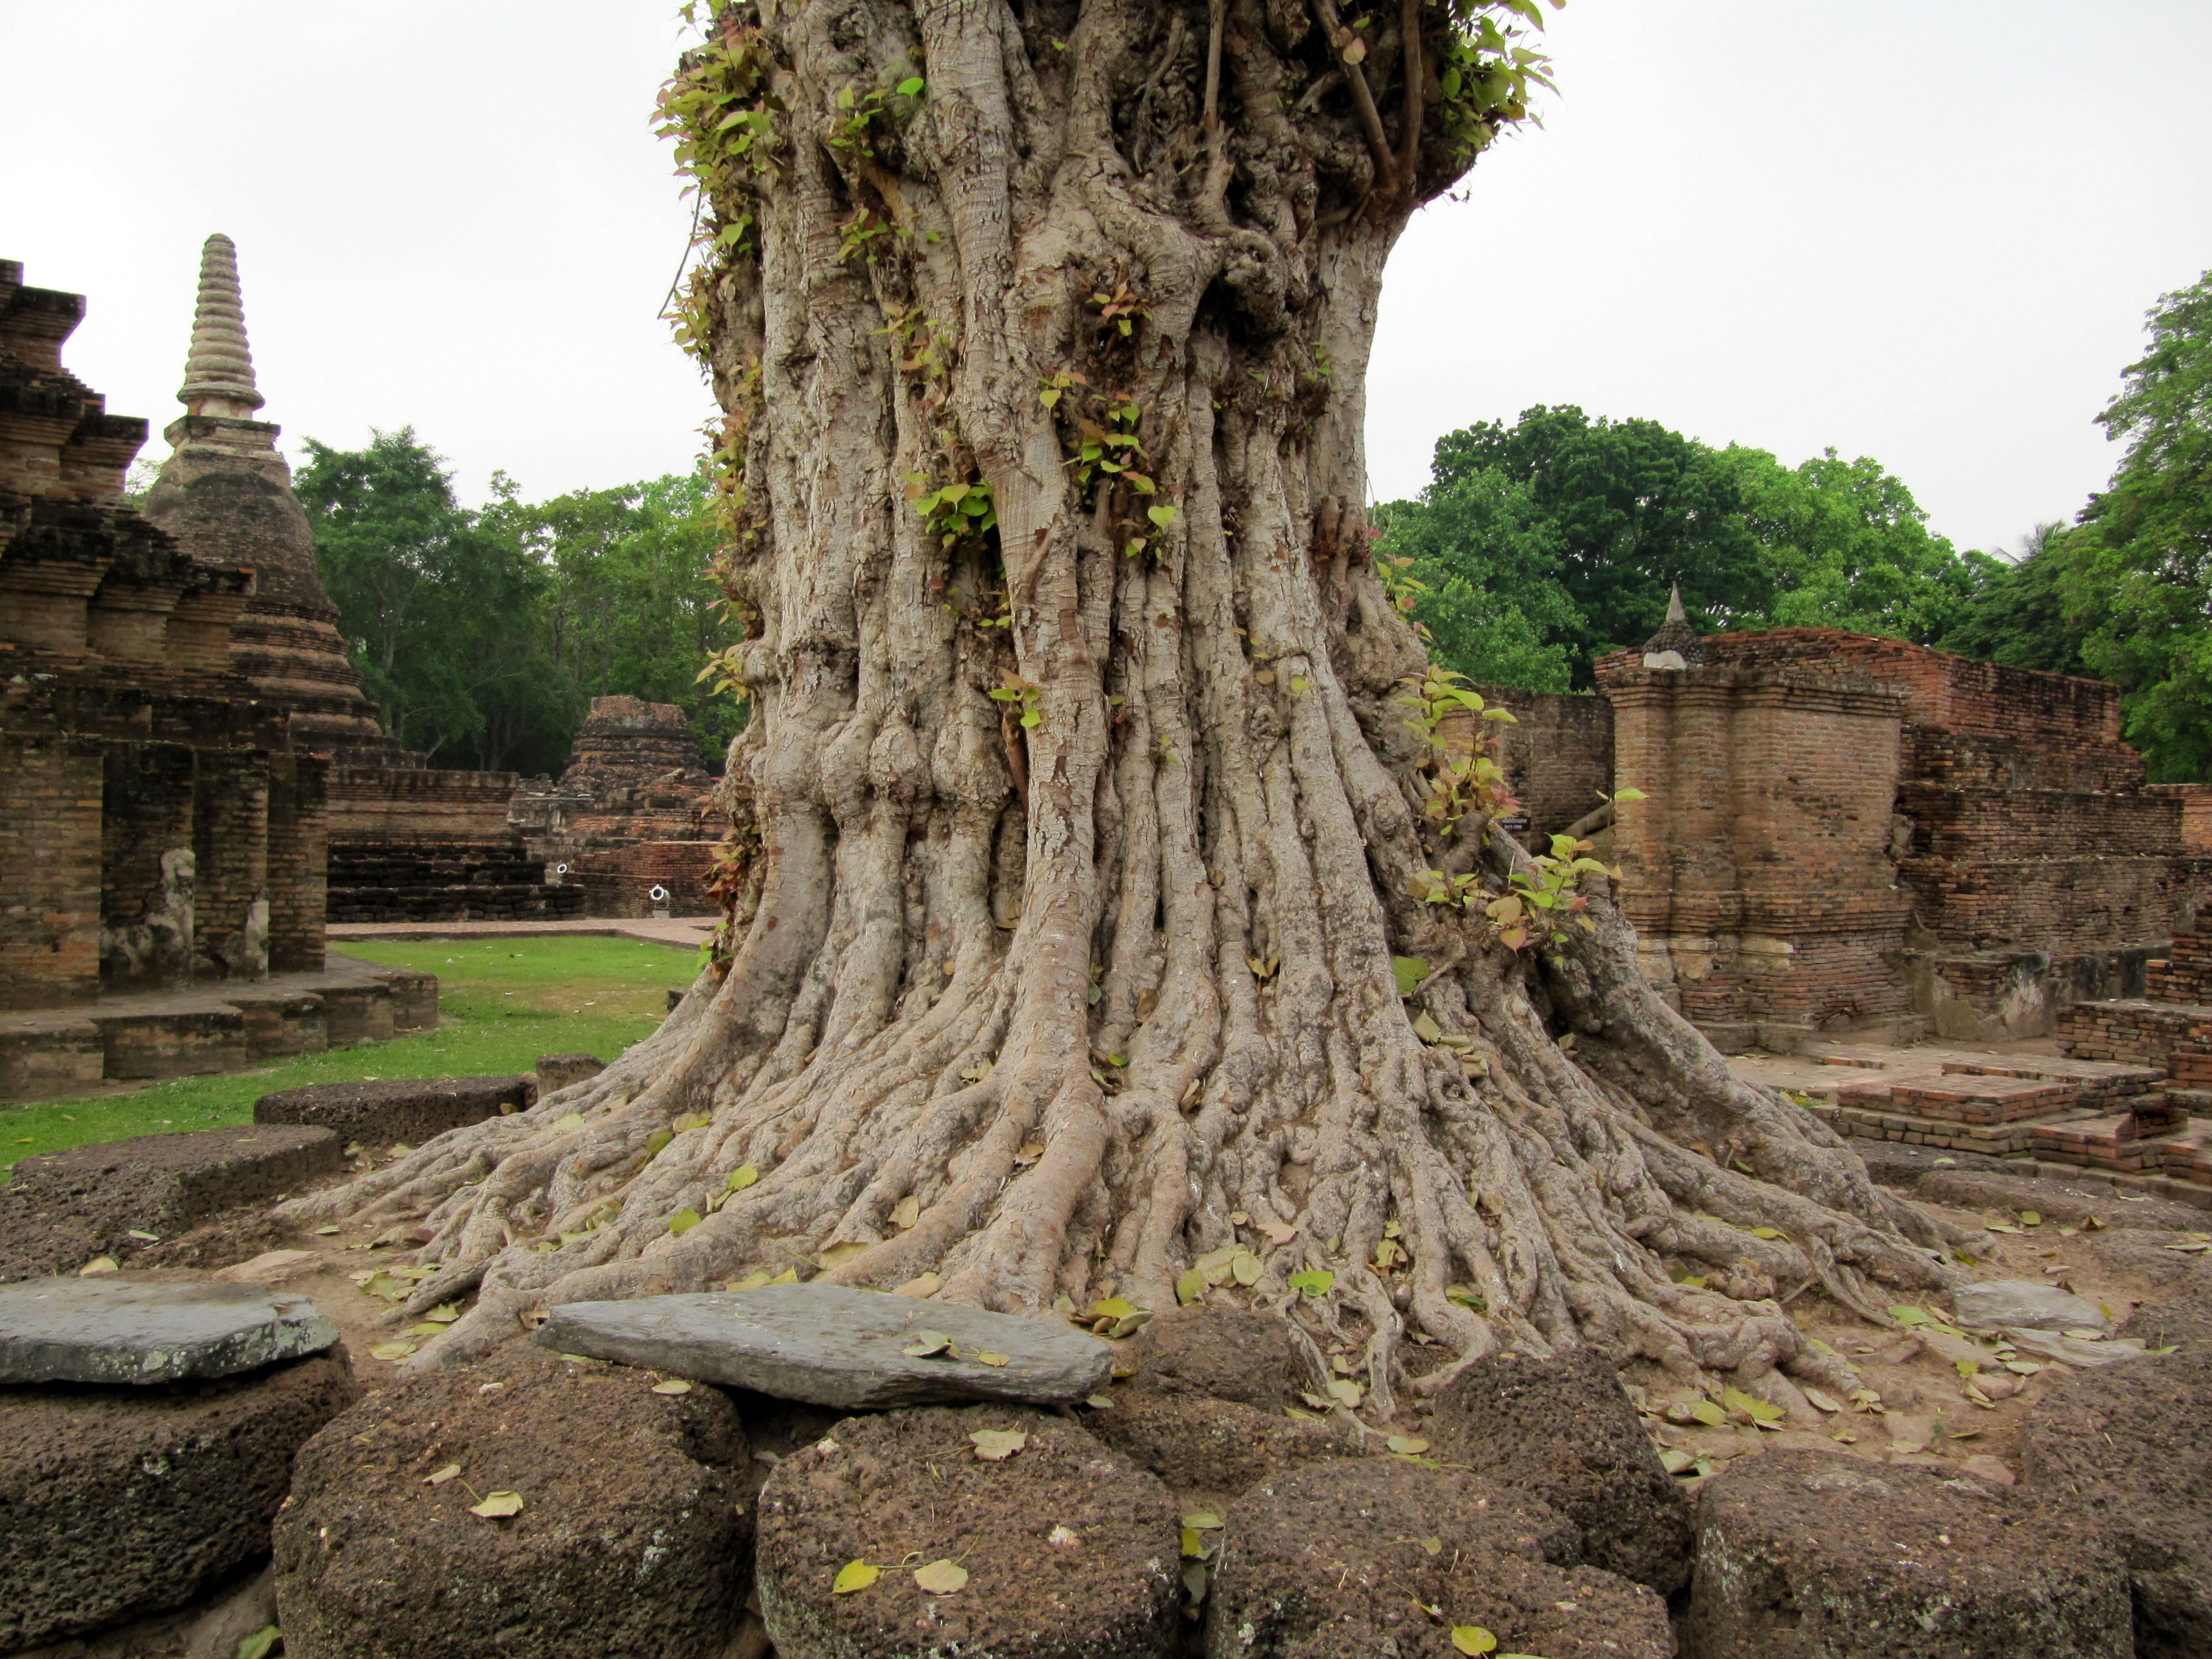 File:Roots of an old tree in Thailand.JPG - Wikimedia Commons